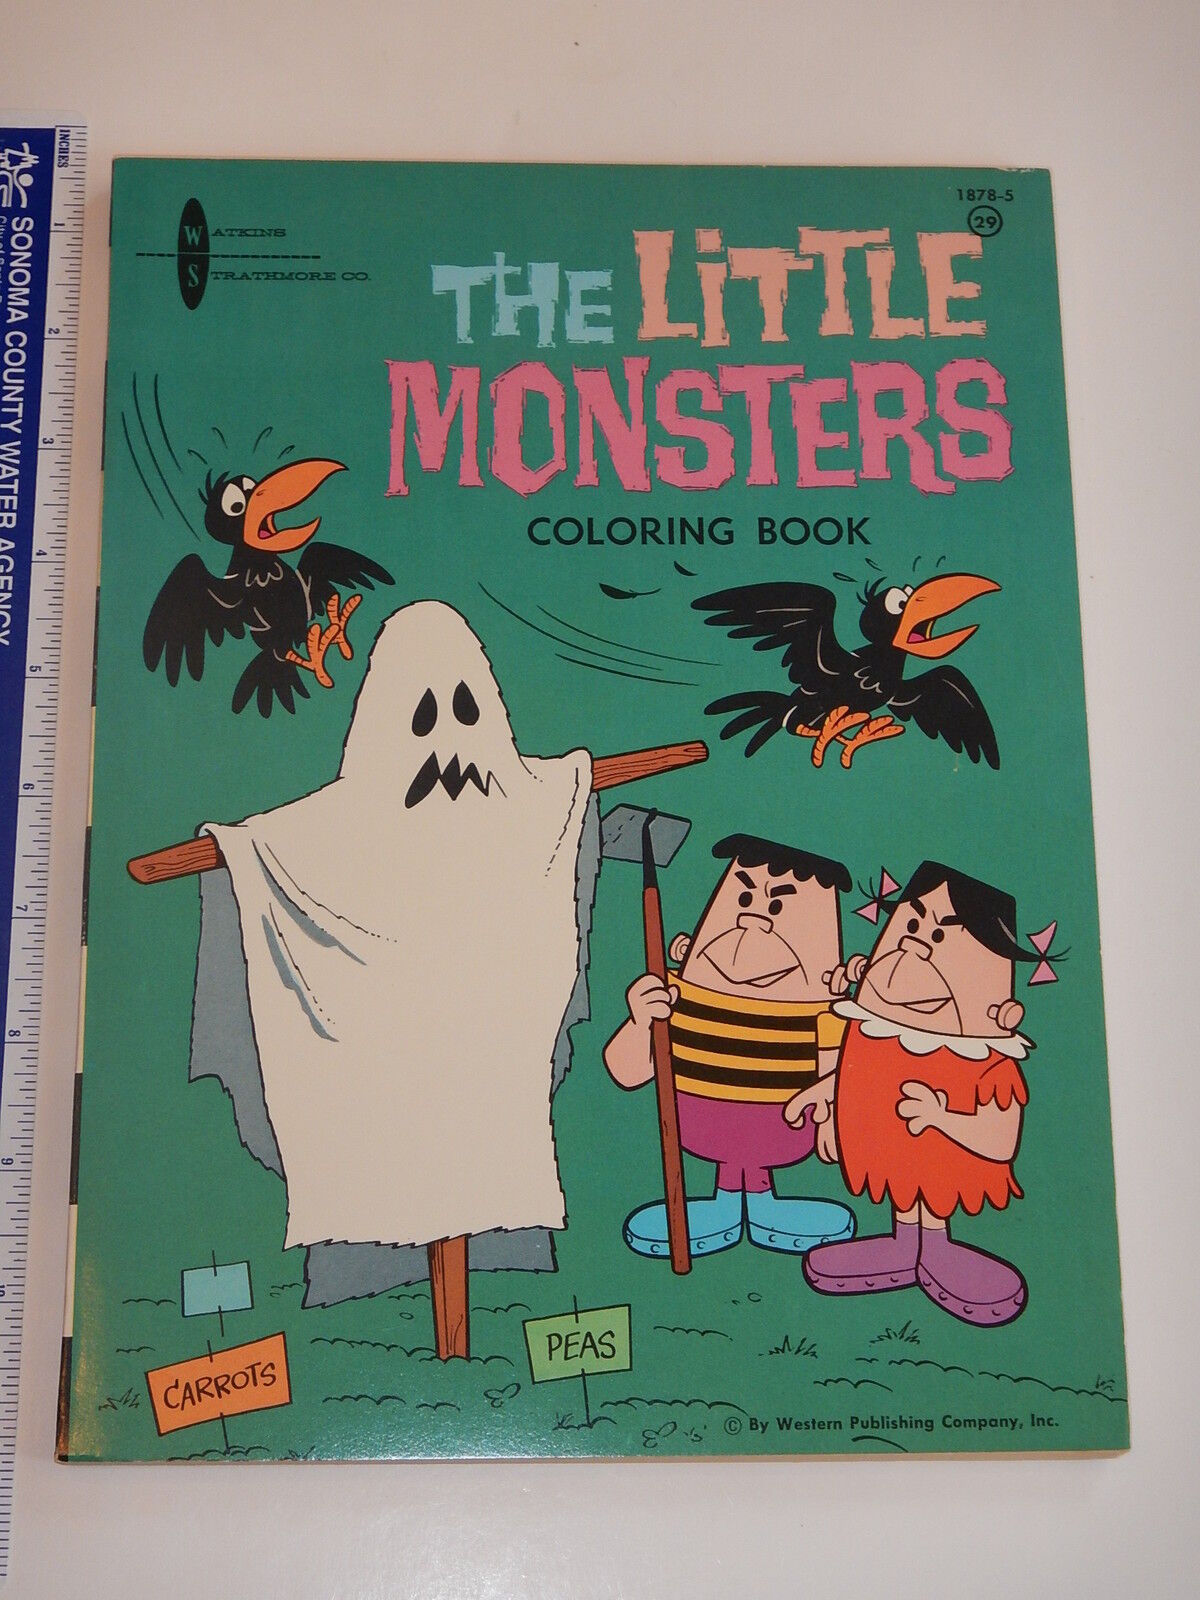 VERY RARE 1960s THE LITTLE MONSTERS COLORING  BOOK  HIGH GRADE UNUSED